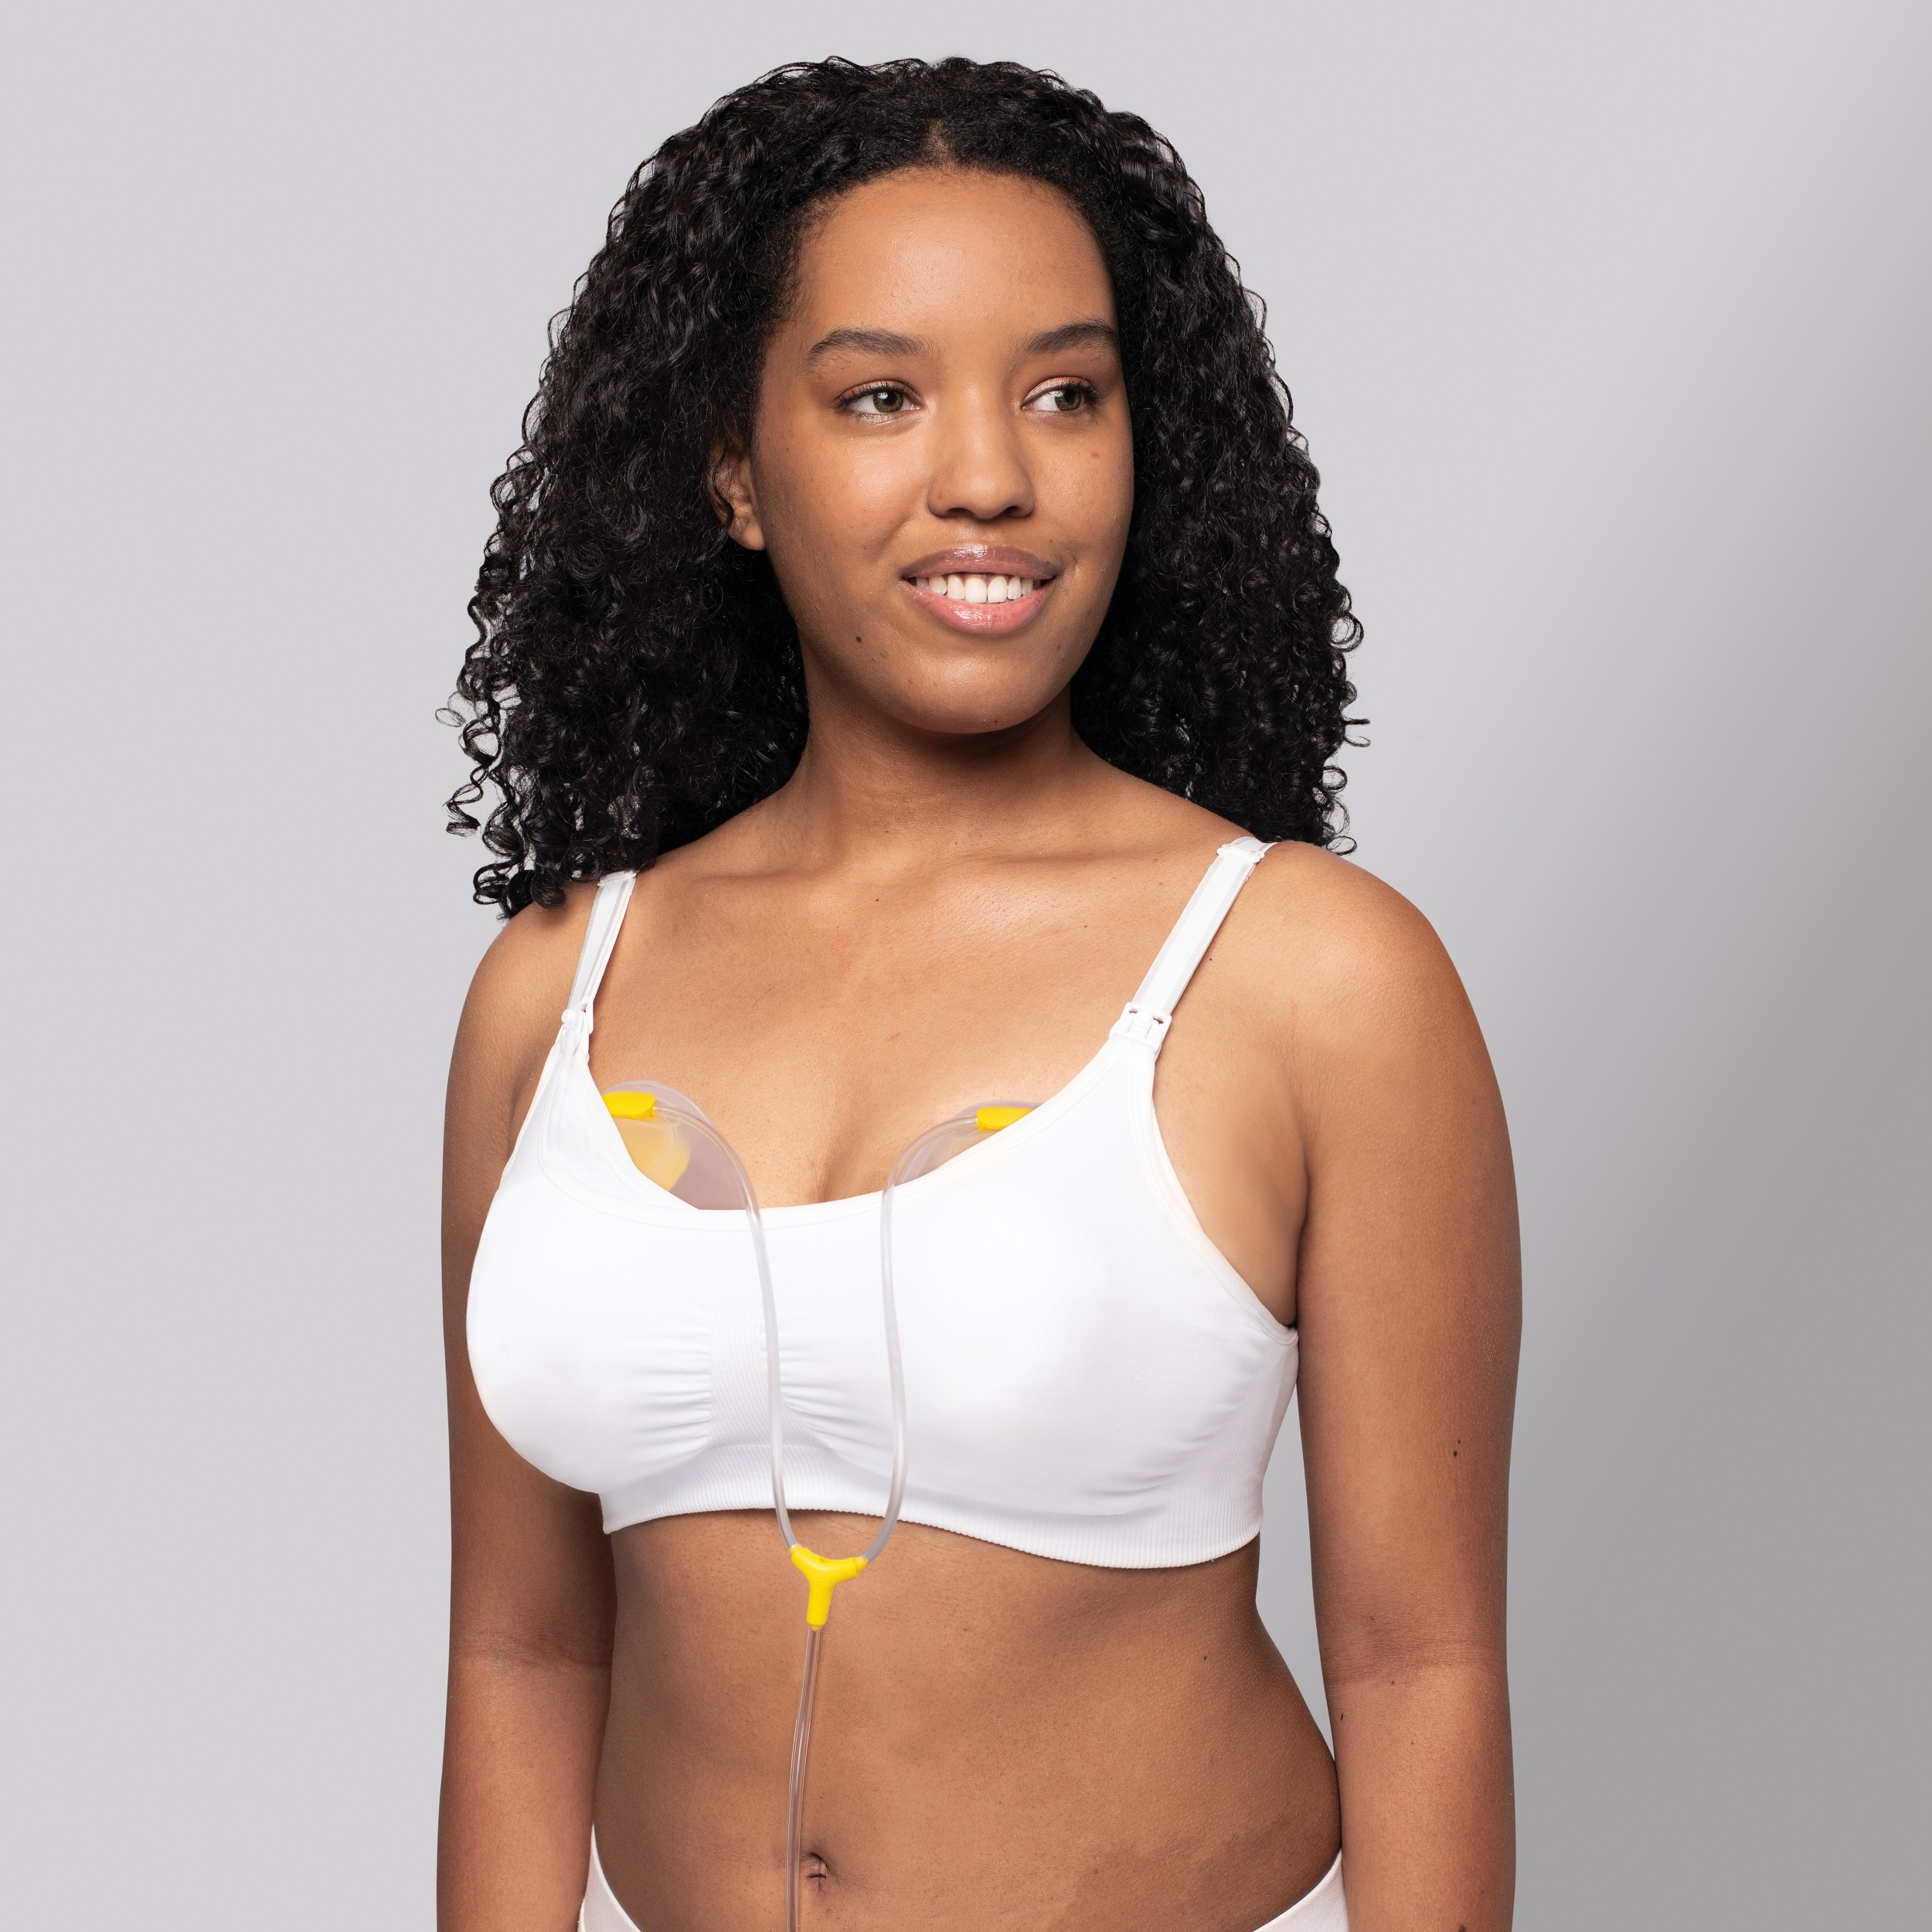 3in 1 Hands-free Pumping and Nursing Bra